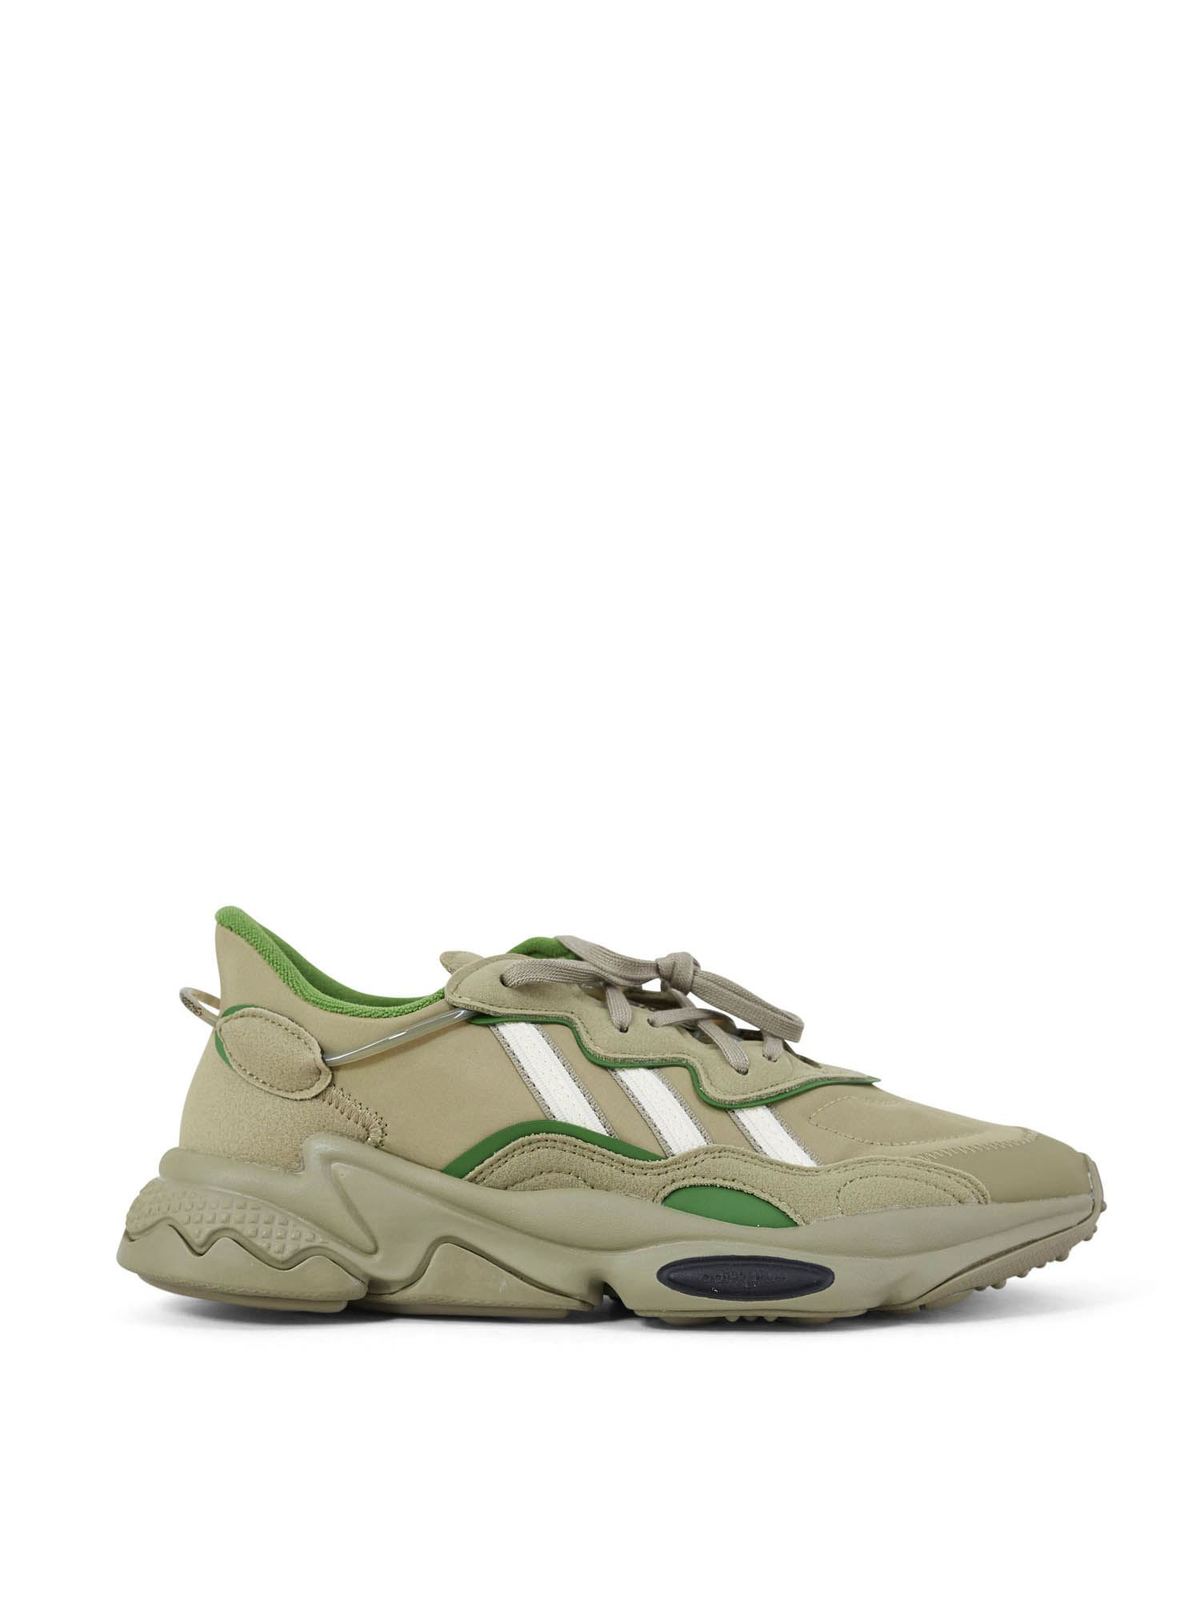 Trainers Adidas Originals Ozweego Sneakers In Orbit Green Color H04241